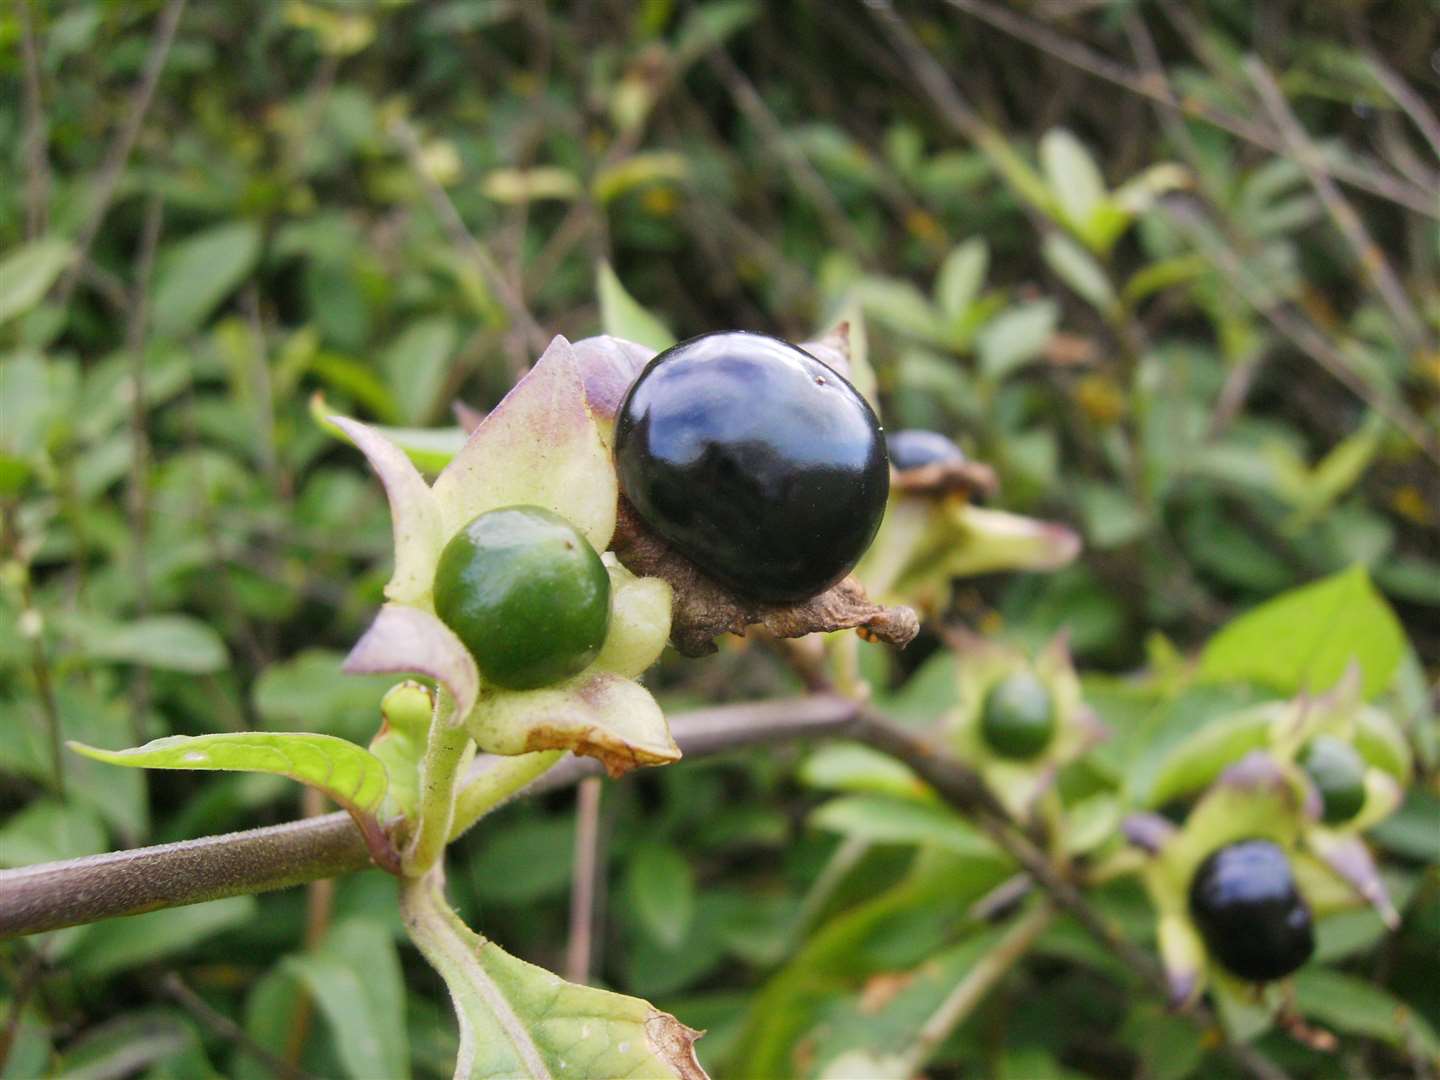 A deadly nightshade berry